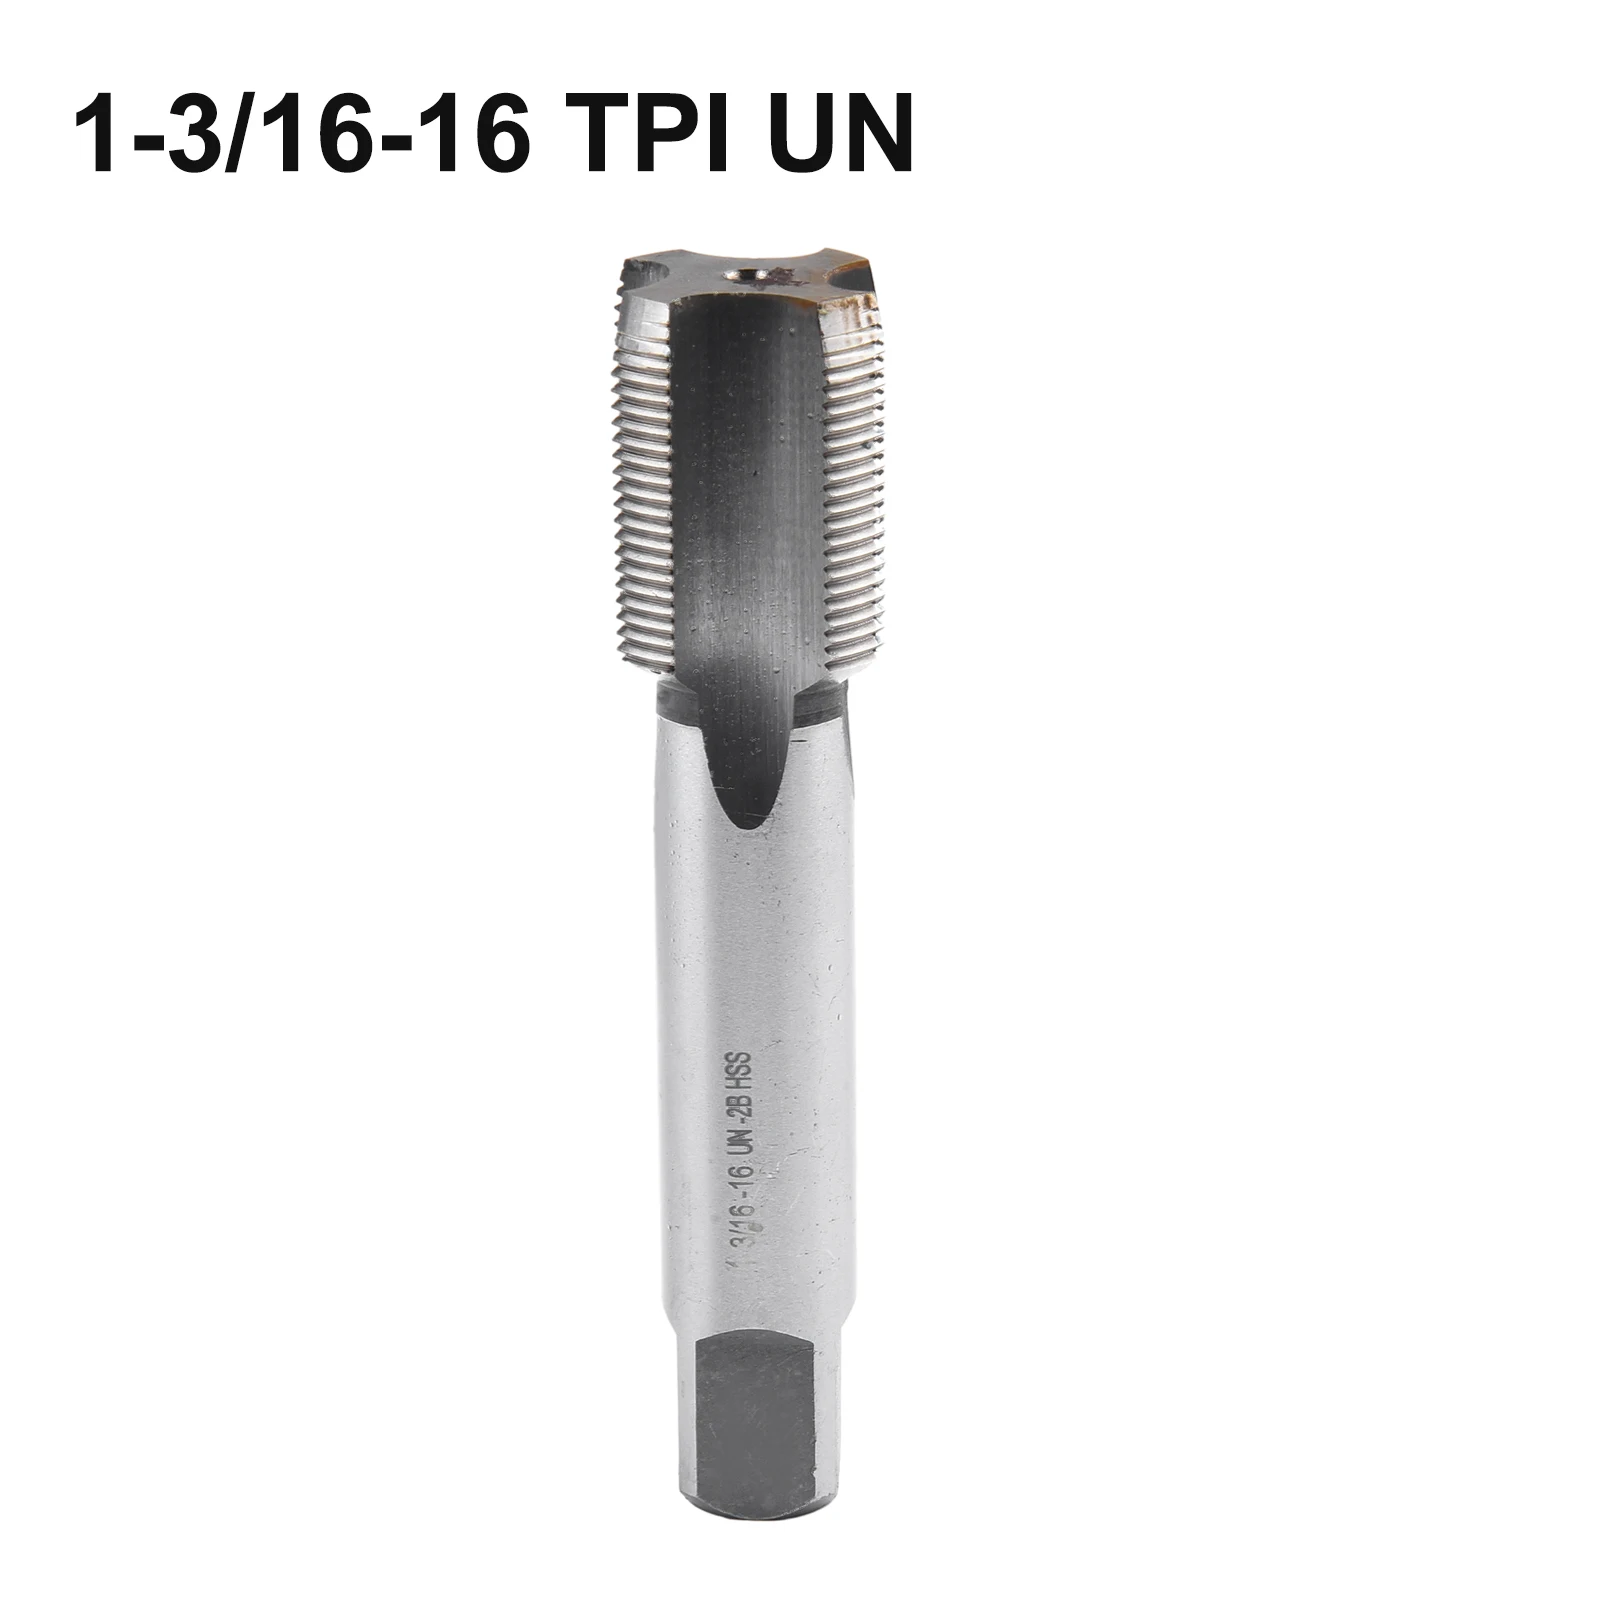 

HSS 1-3/16 -16 Thread Tap 1 3/16inch 16 TPI Tapping Right Hand Free Threading Tools Mold Machining Hand Tap Tools Accessories